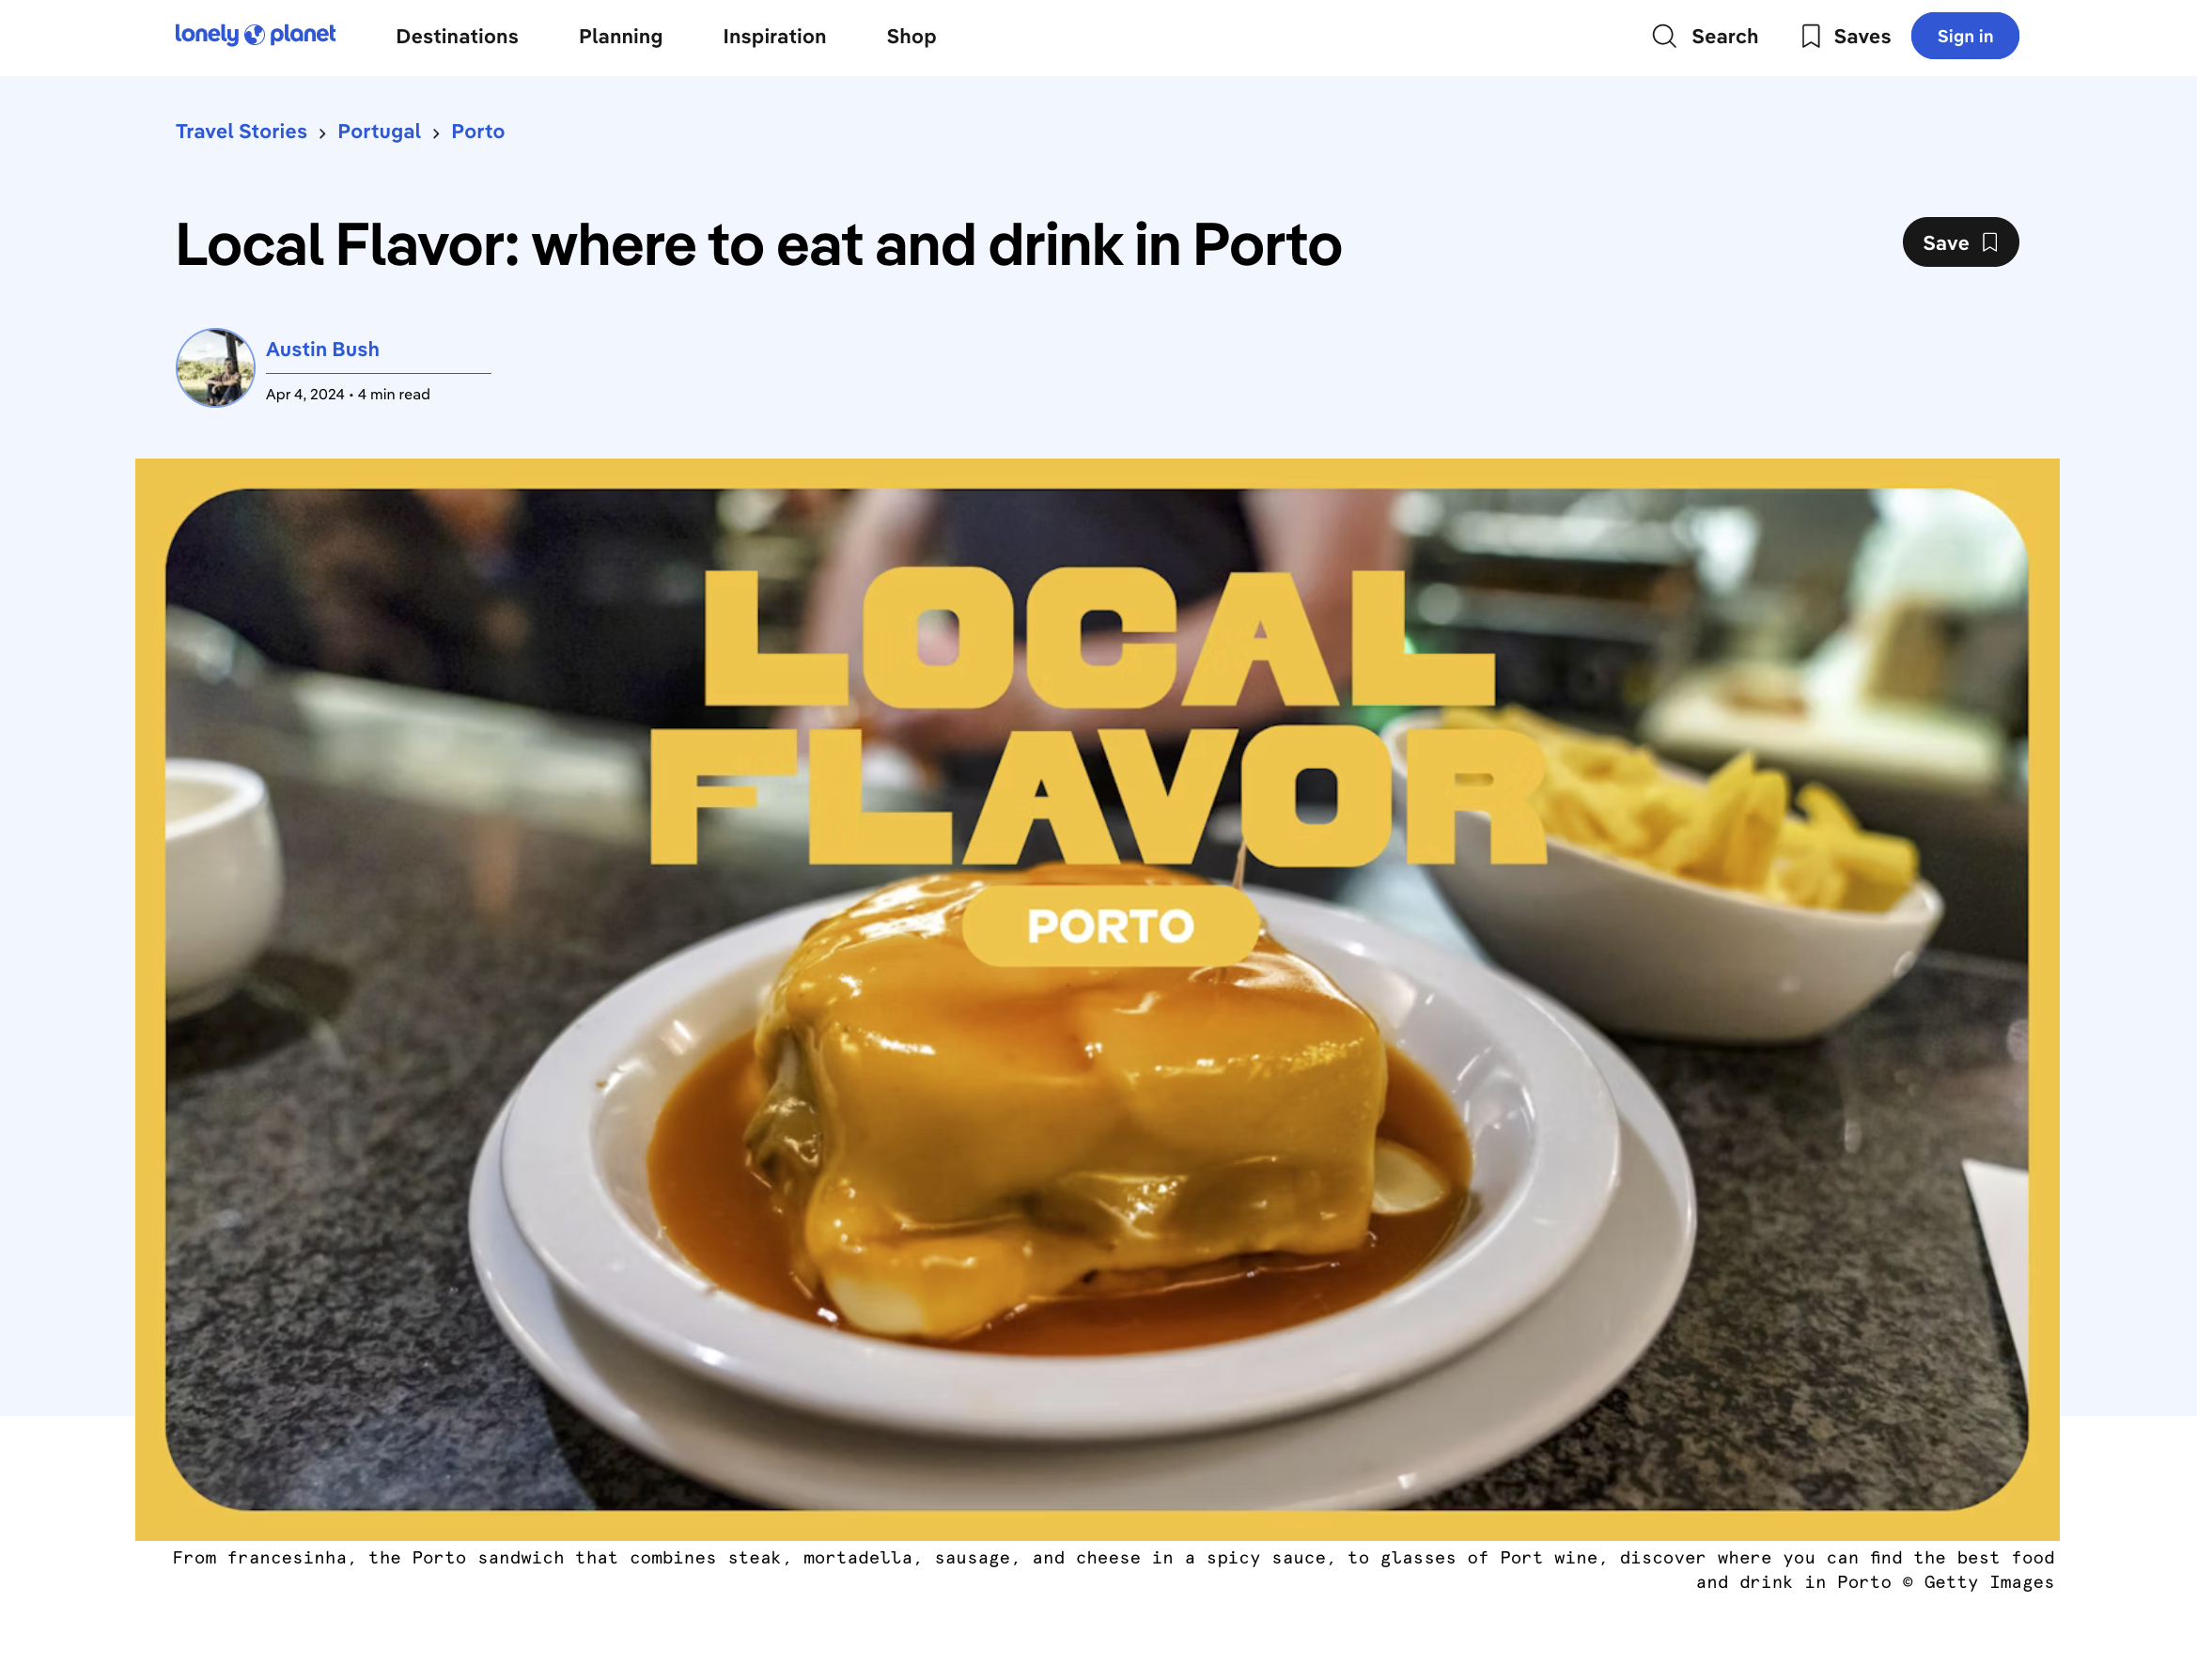  Click here to go to this article: “ Local Flavor: where to eat and drink in Porto ,” text and photos, Lonely Planet 